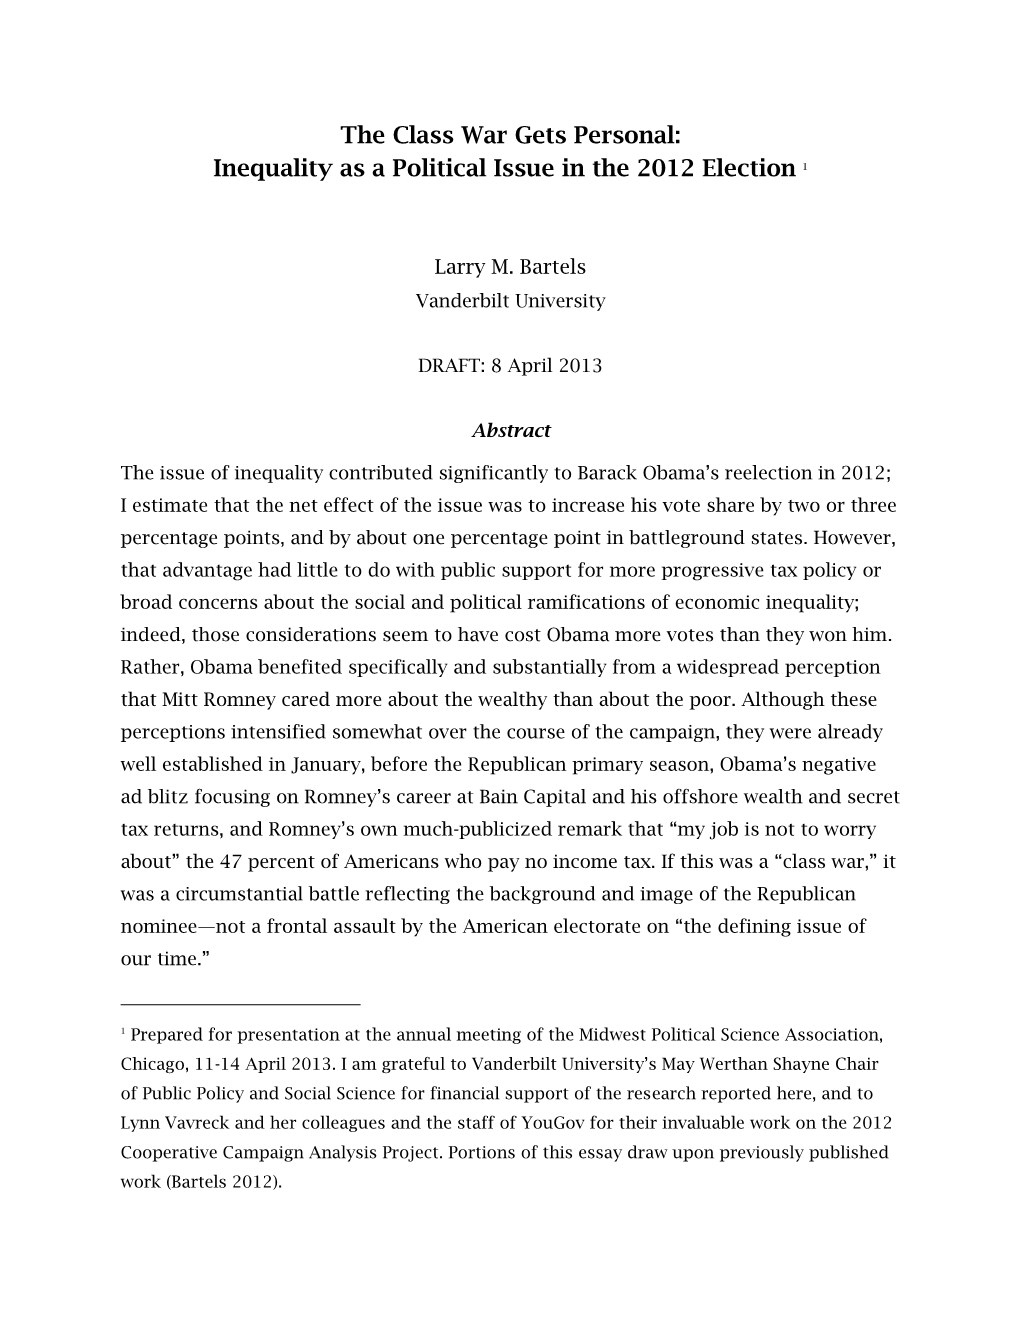 Inequality As a Political Issue in the 2012 Election 1